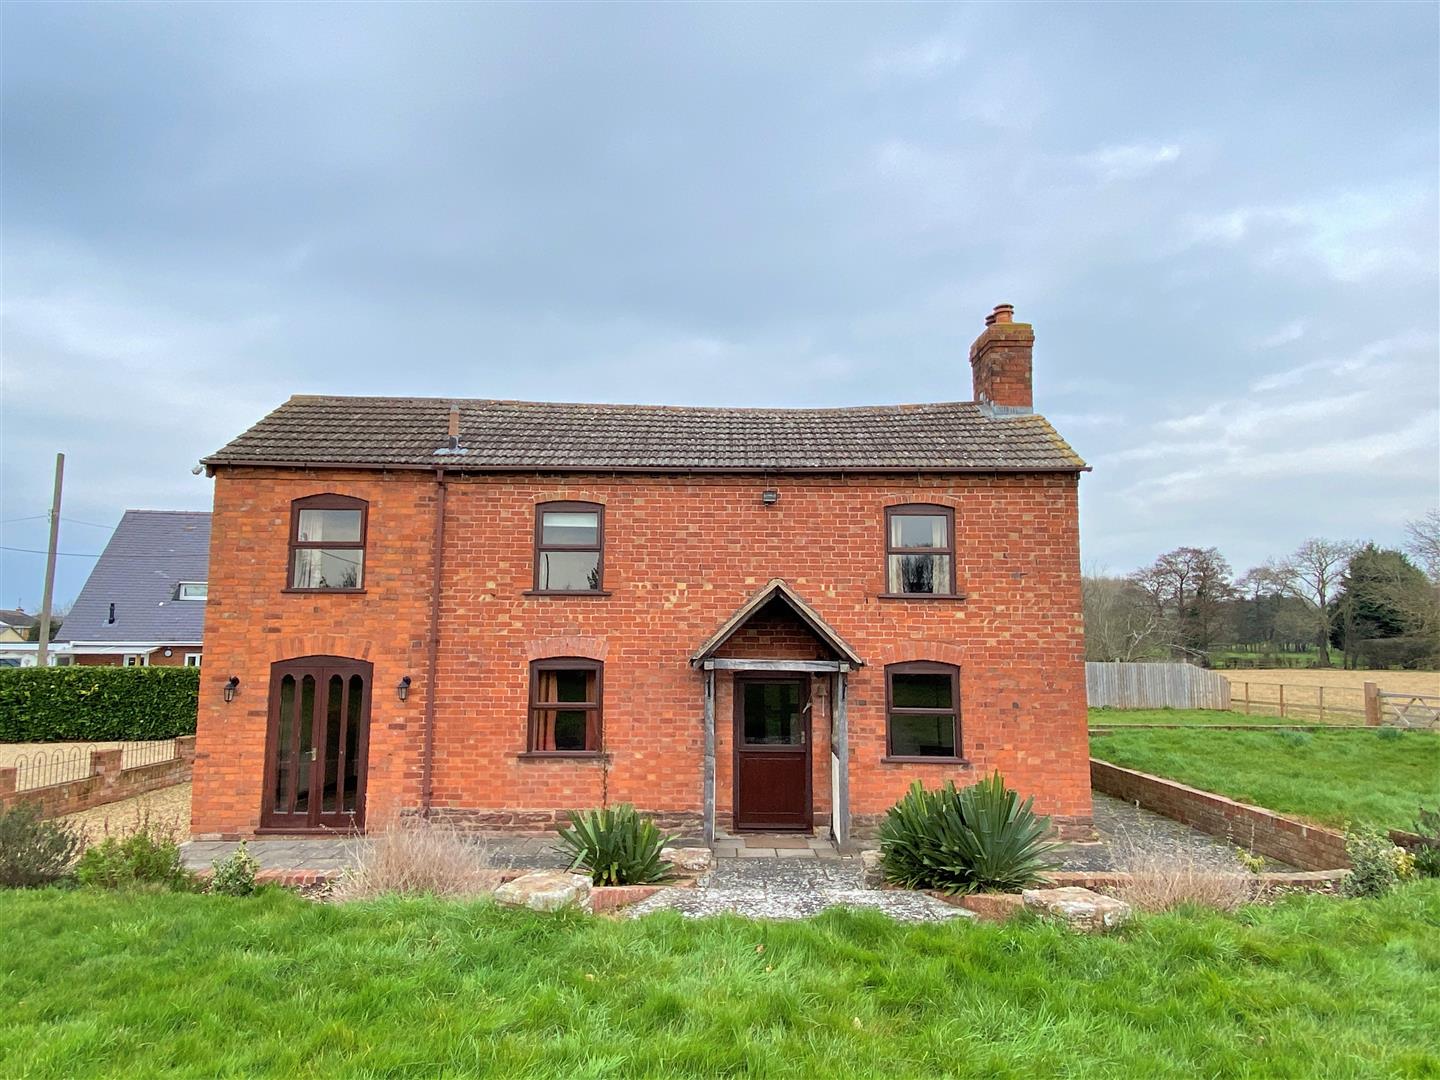 3 bed detached for sale in Bodenham 24